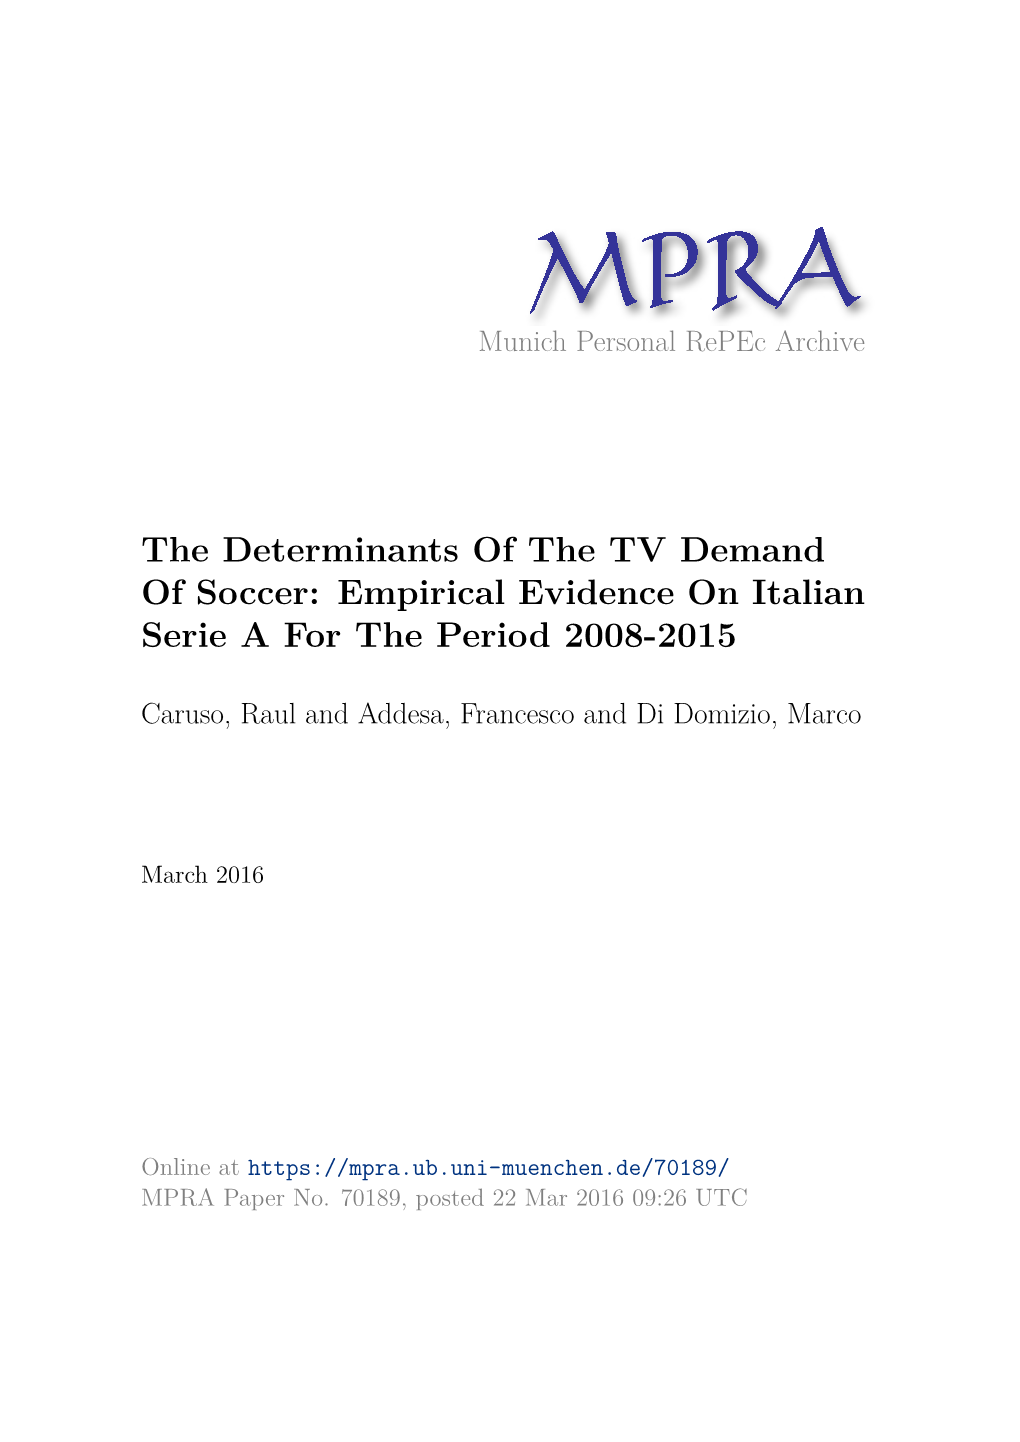 The Determinants of the TV Demand of Soccer: Empirical Evidence on Italian Serie a for the Period 2008-2015